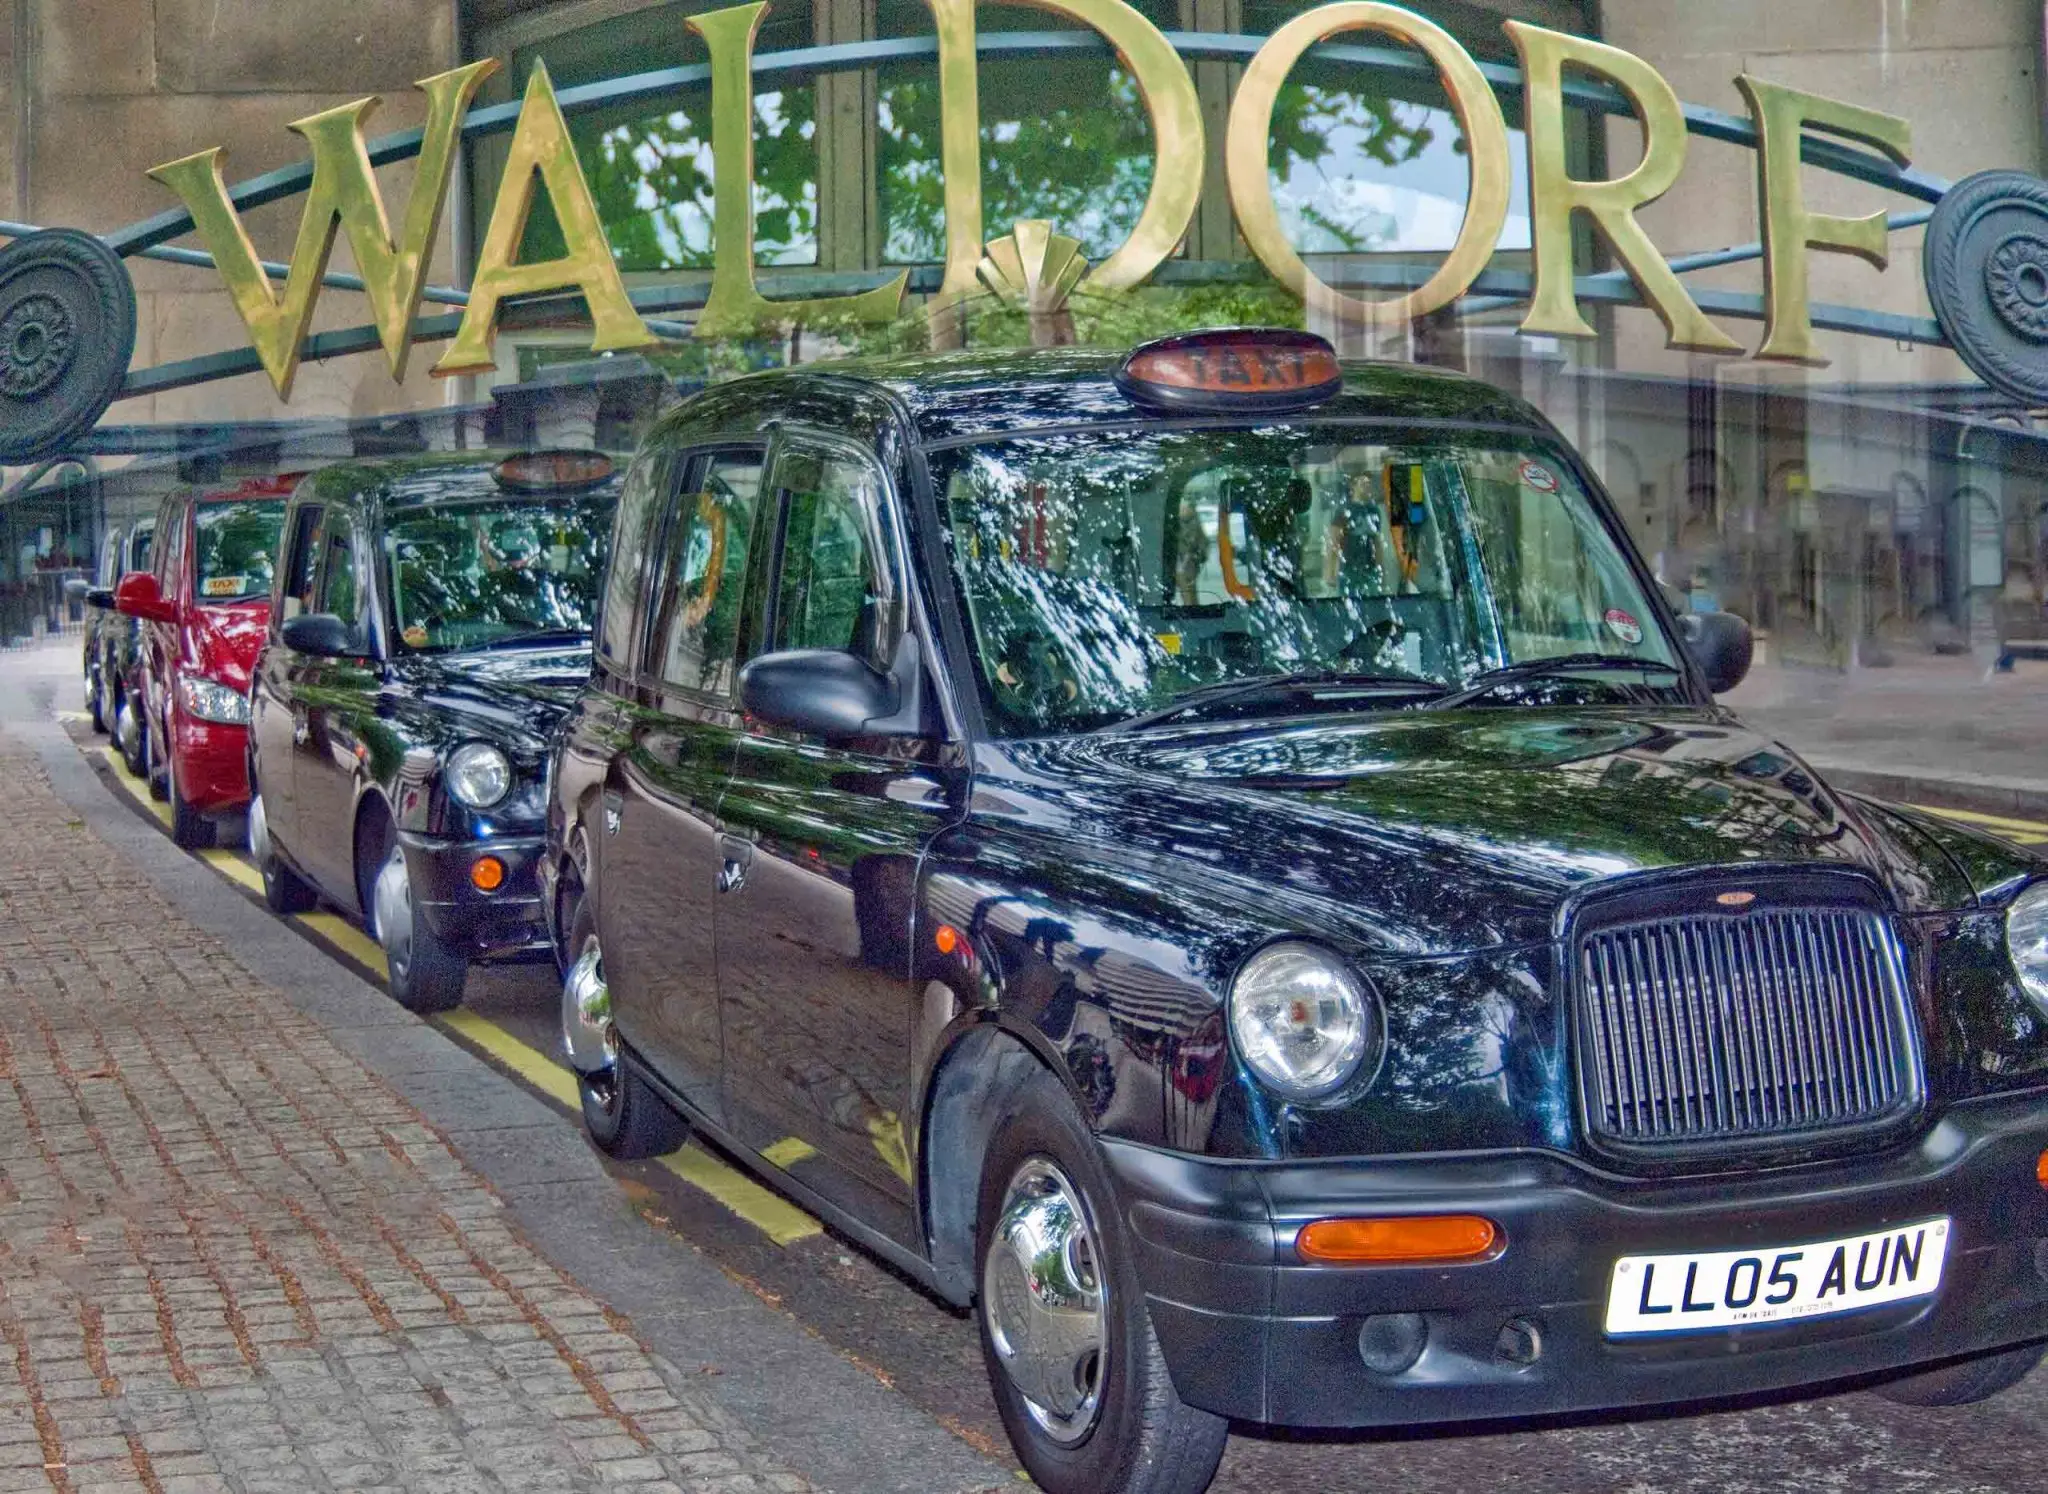 order taxi london - How to book a ride in London